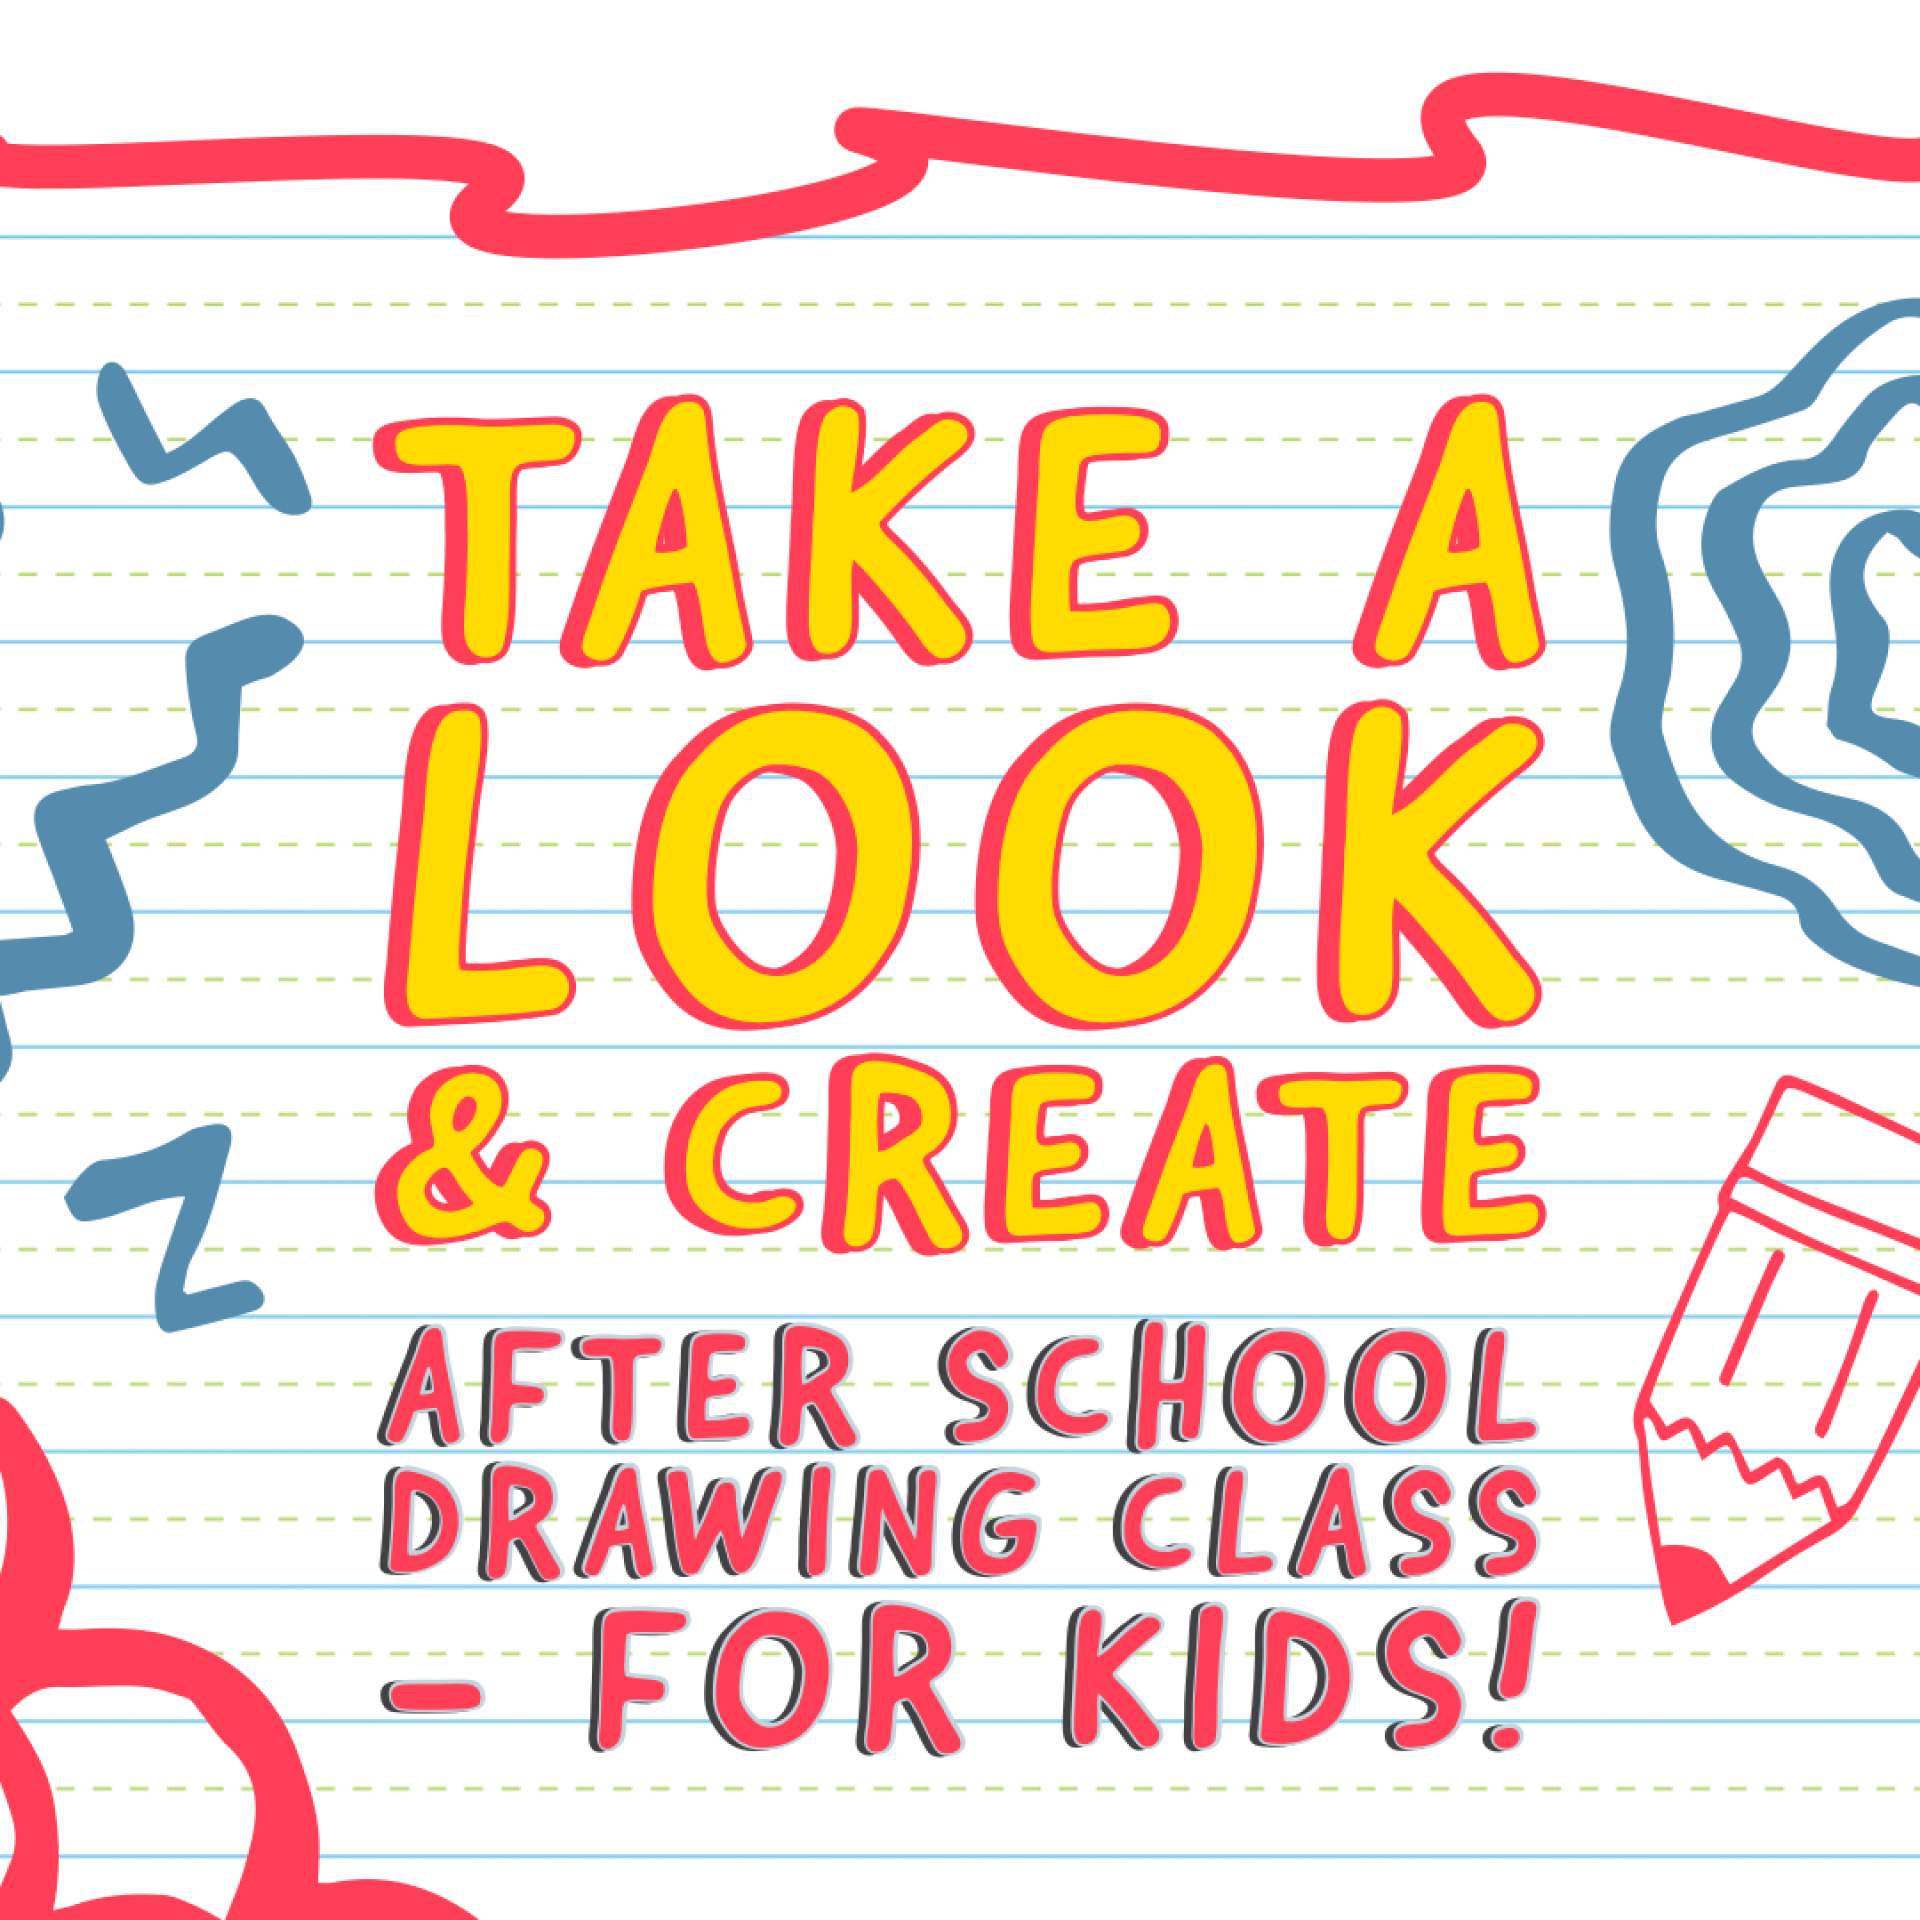 Take a Look & Create! After School